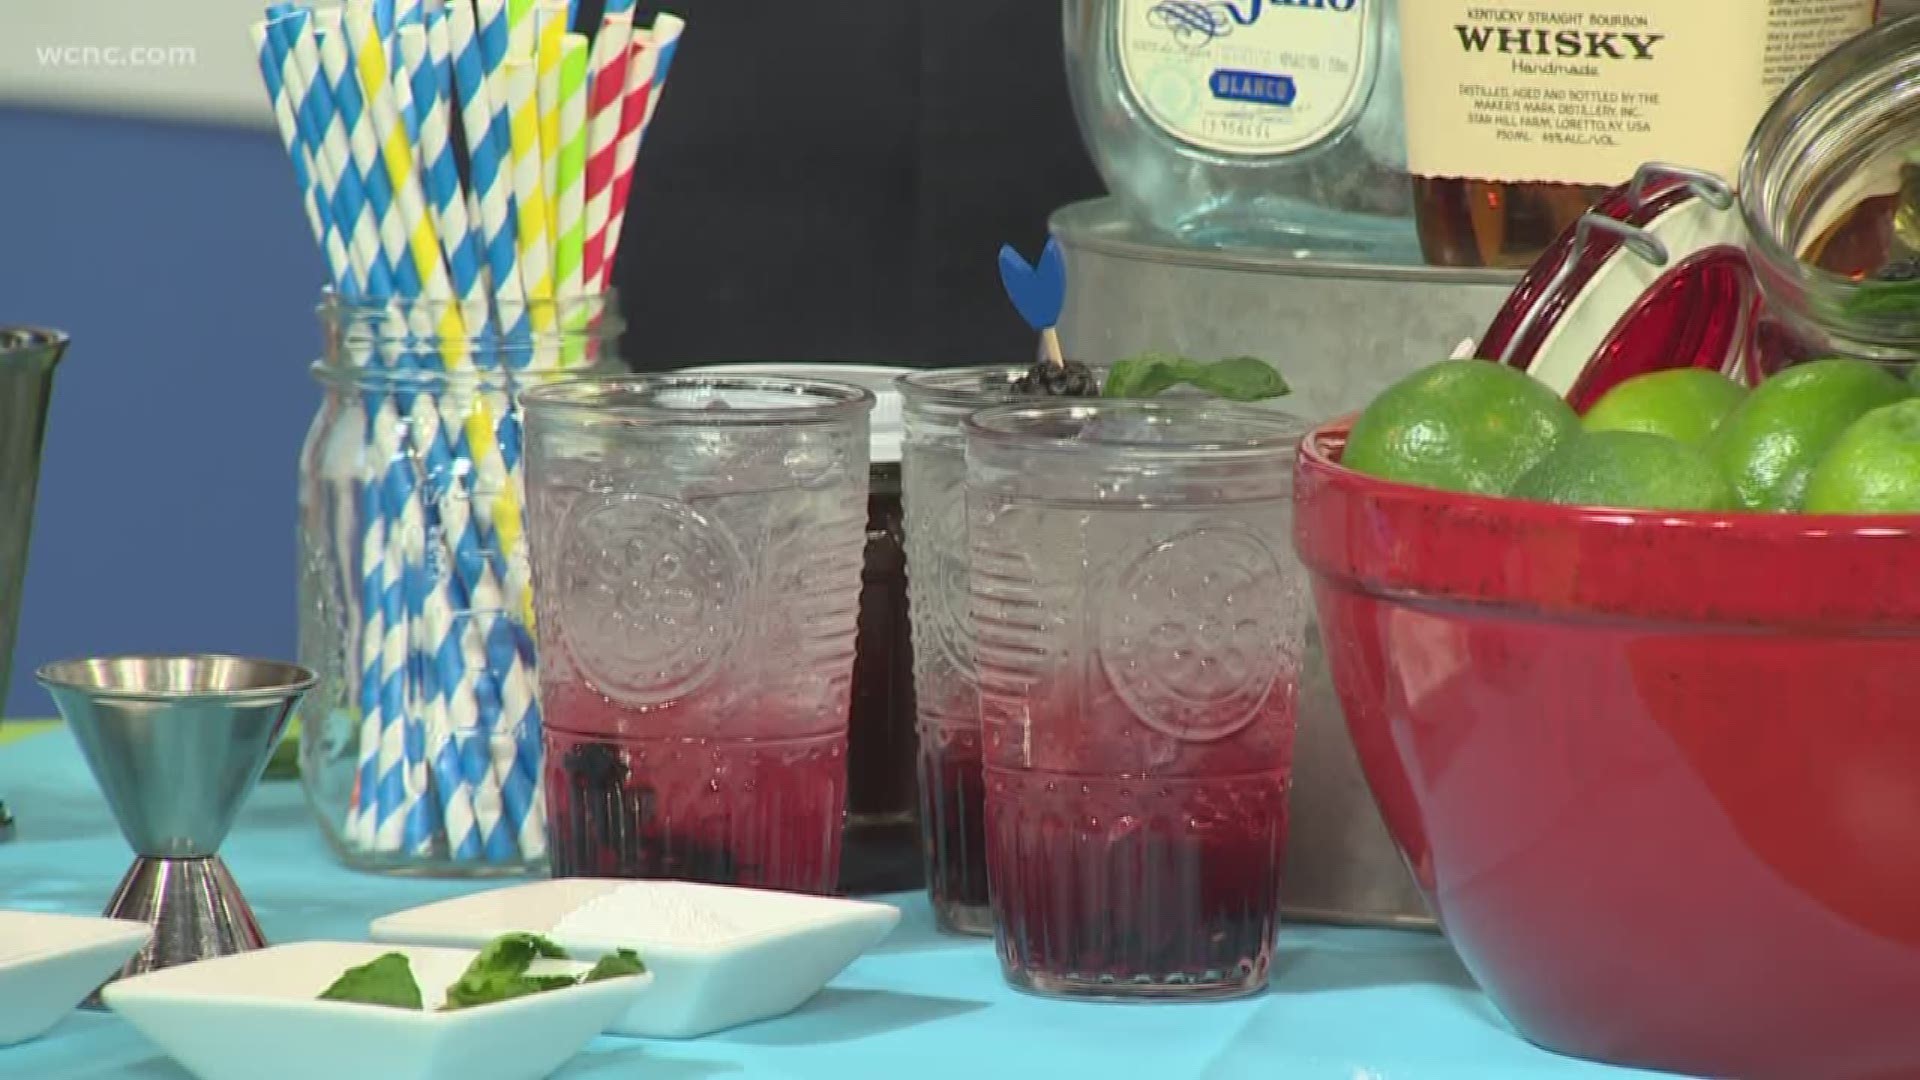 Russ Johnson is putting a spin on the popular Mint Julep drink ahead of the Kentucky Derby.